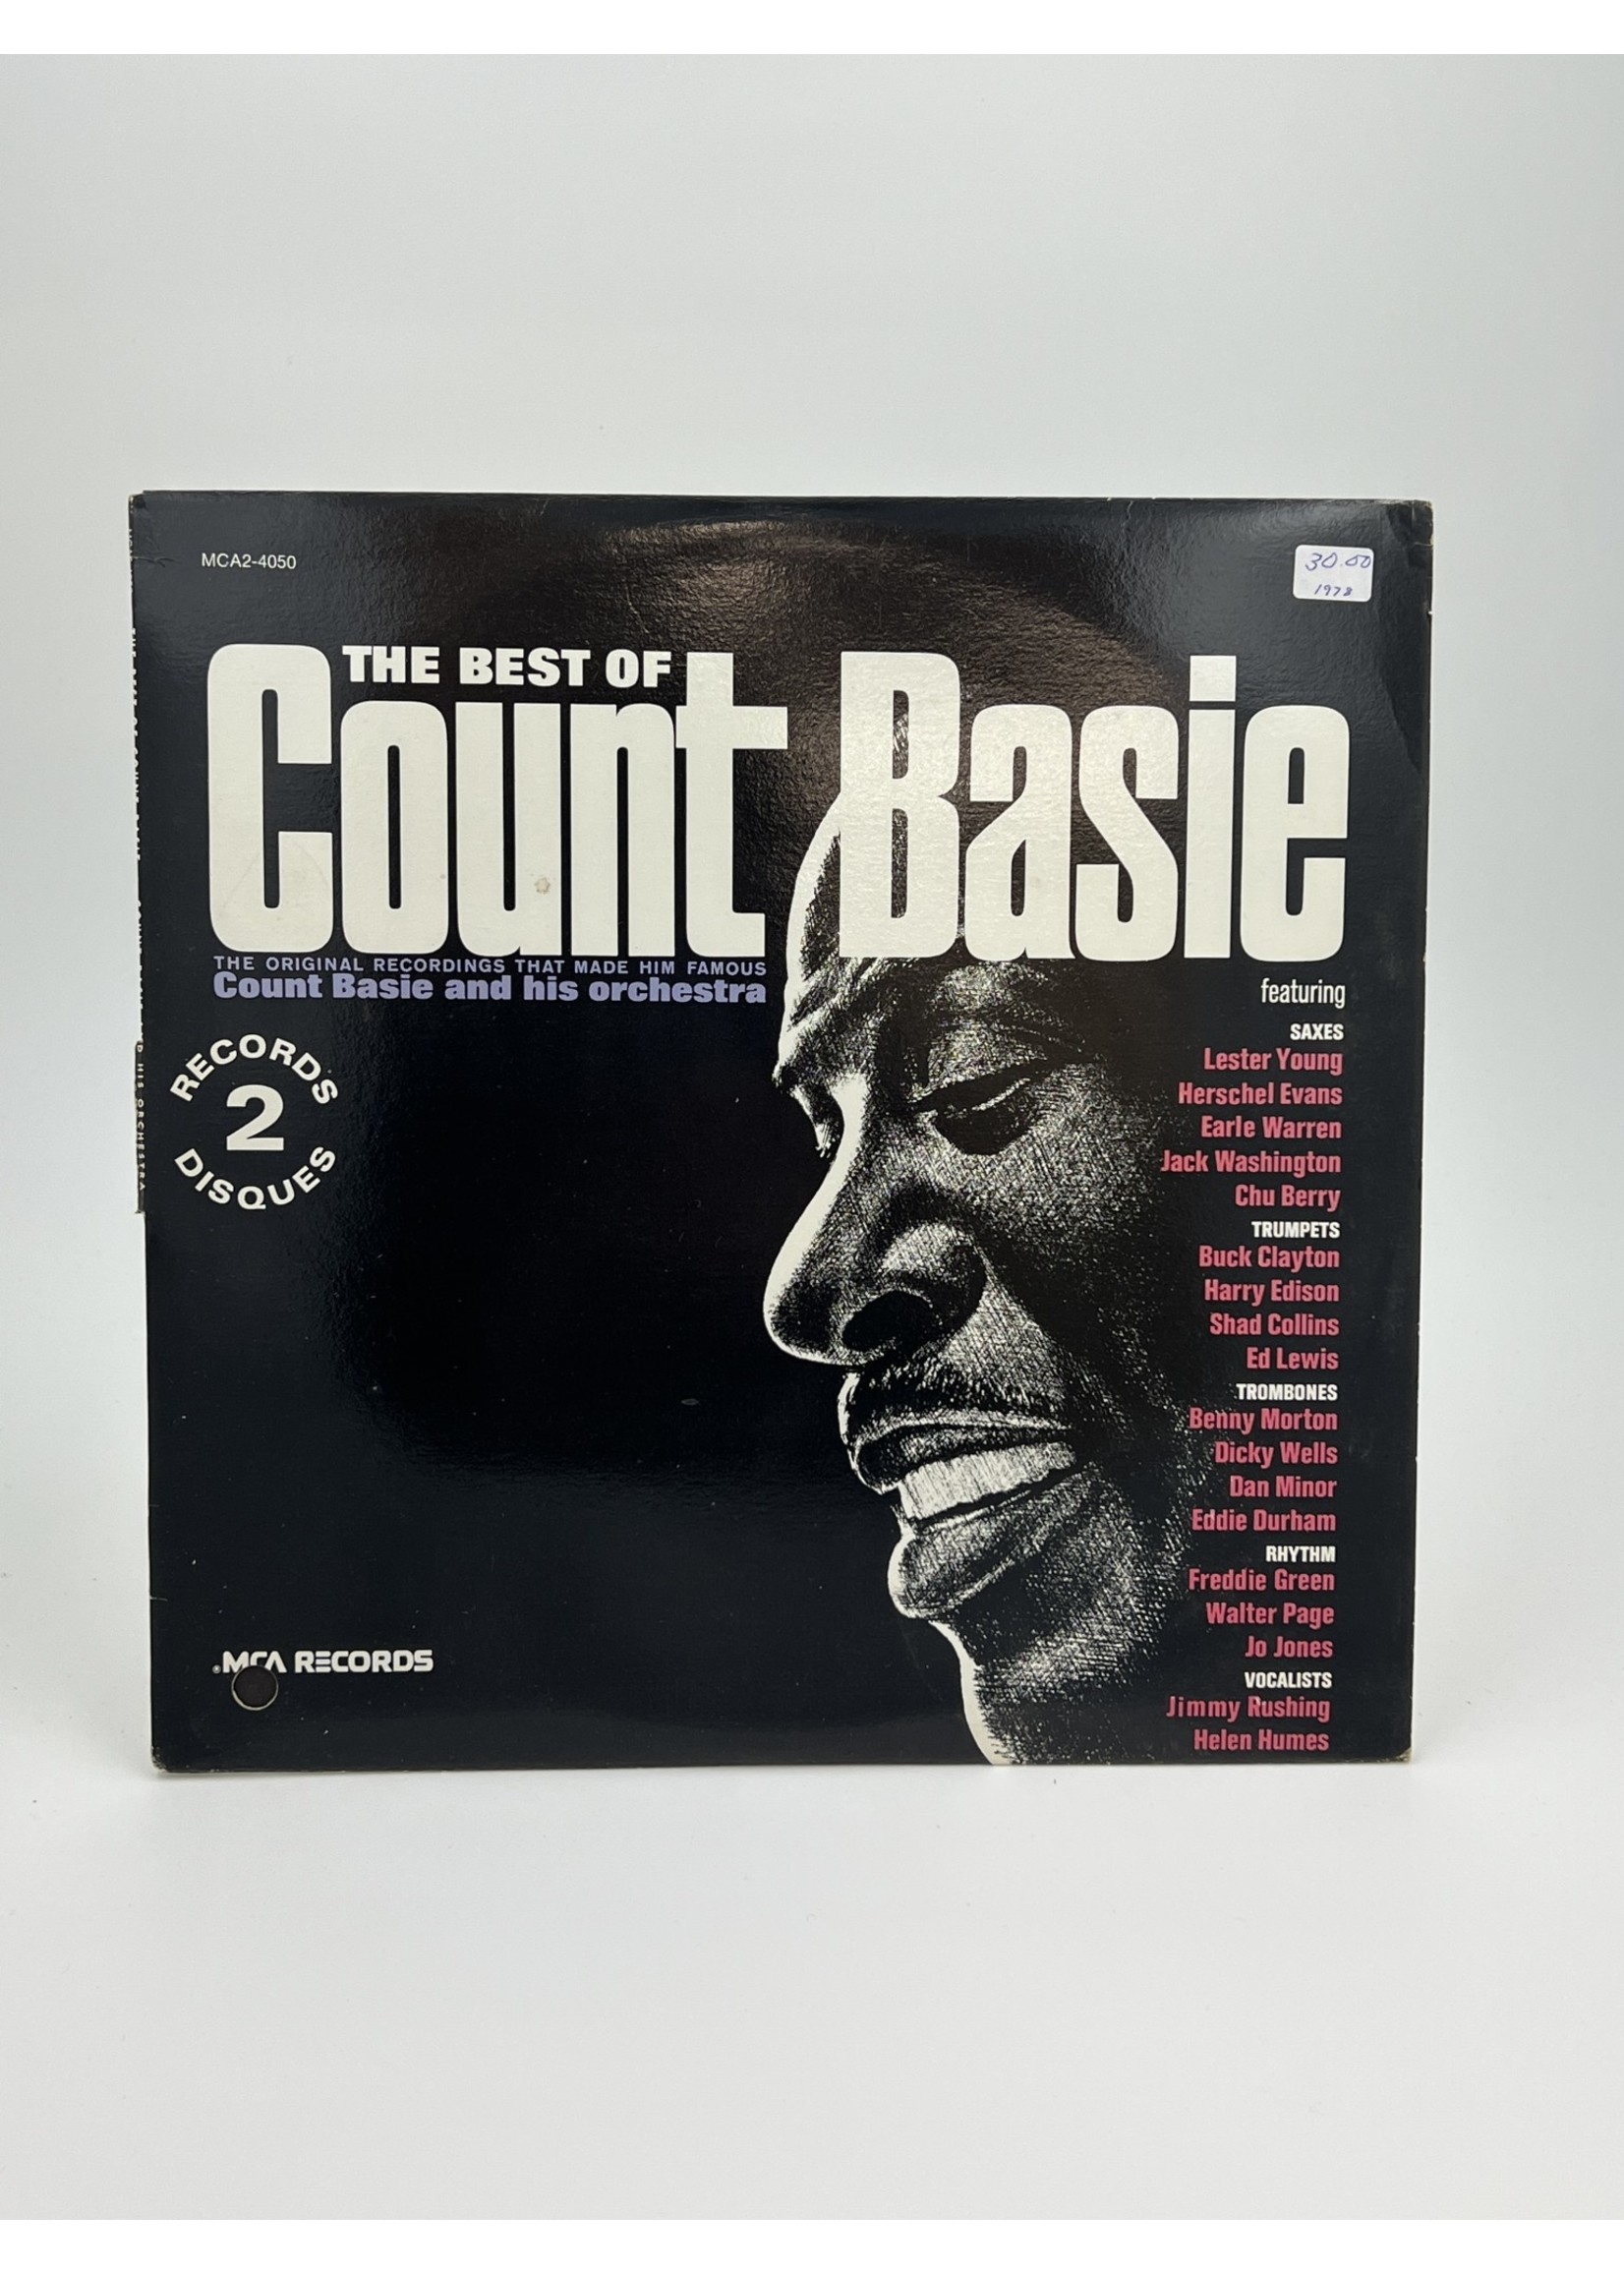 LP The Best of Count Basie LP Record